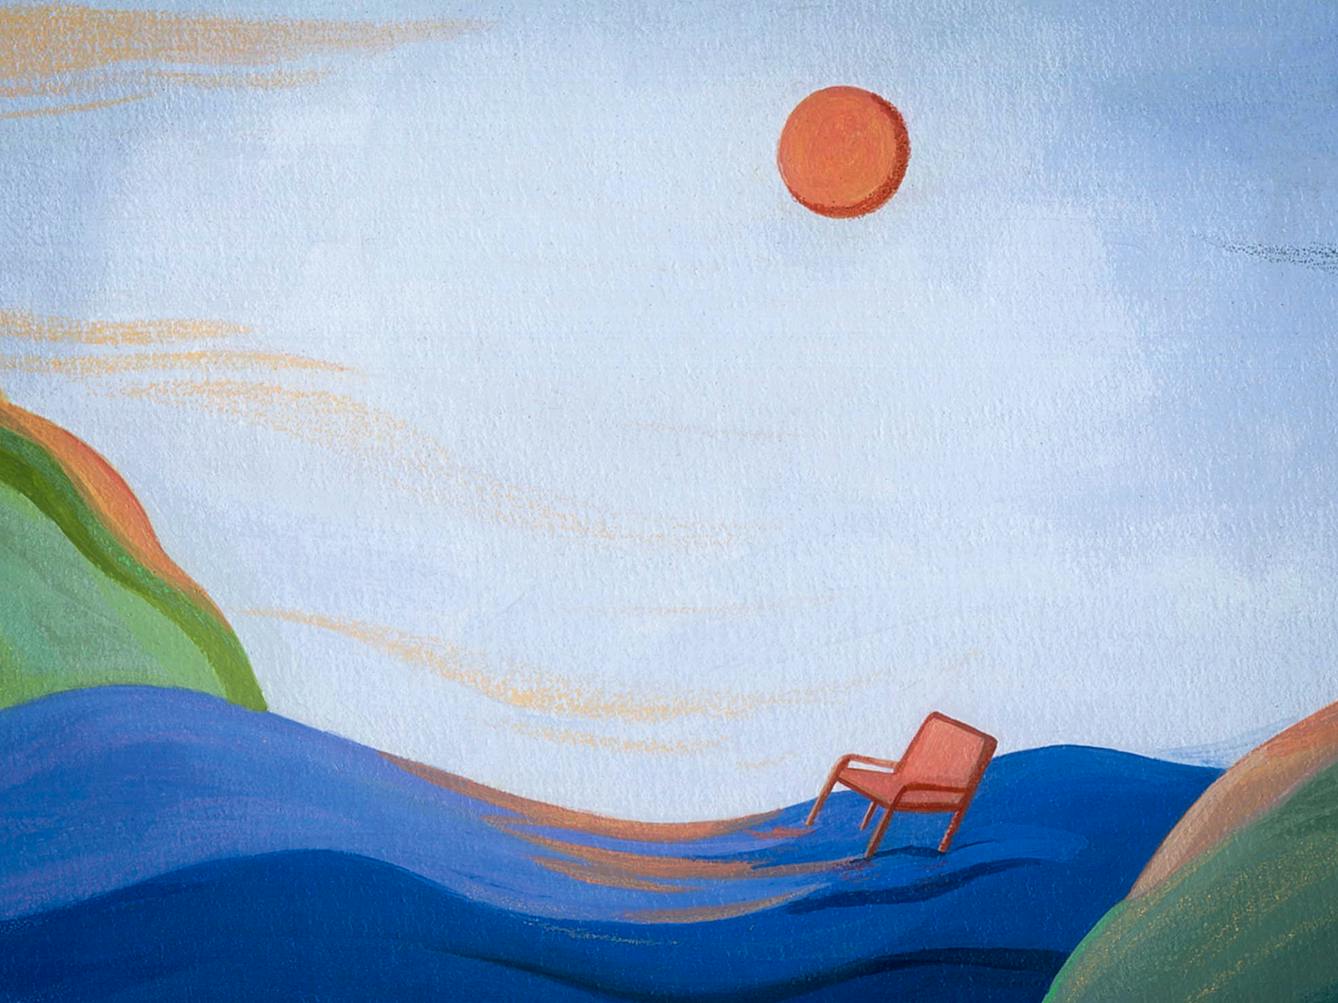 Detail from a larger painted artwork with vivid saturated colours. The scene shows landscape with a blue river running through the middle of green, tree and grass covered banks. Floating in the middle of the river is a lone red chair, bobbing about beneath a blood red sun in the blue sky.